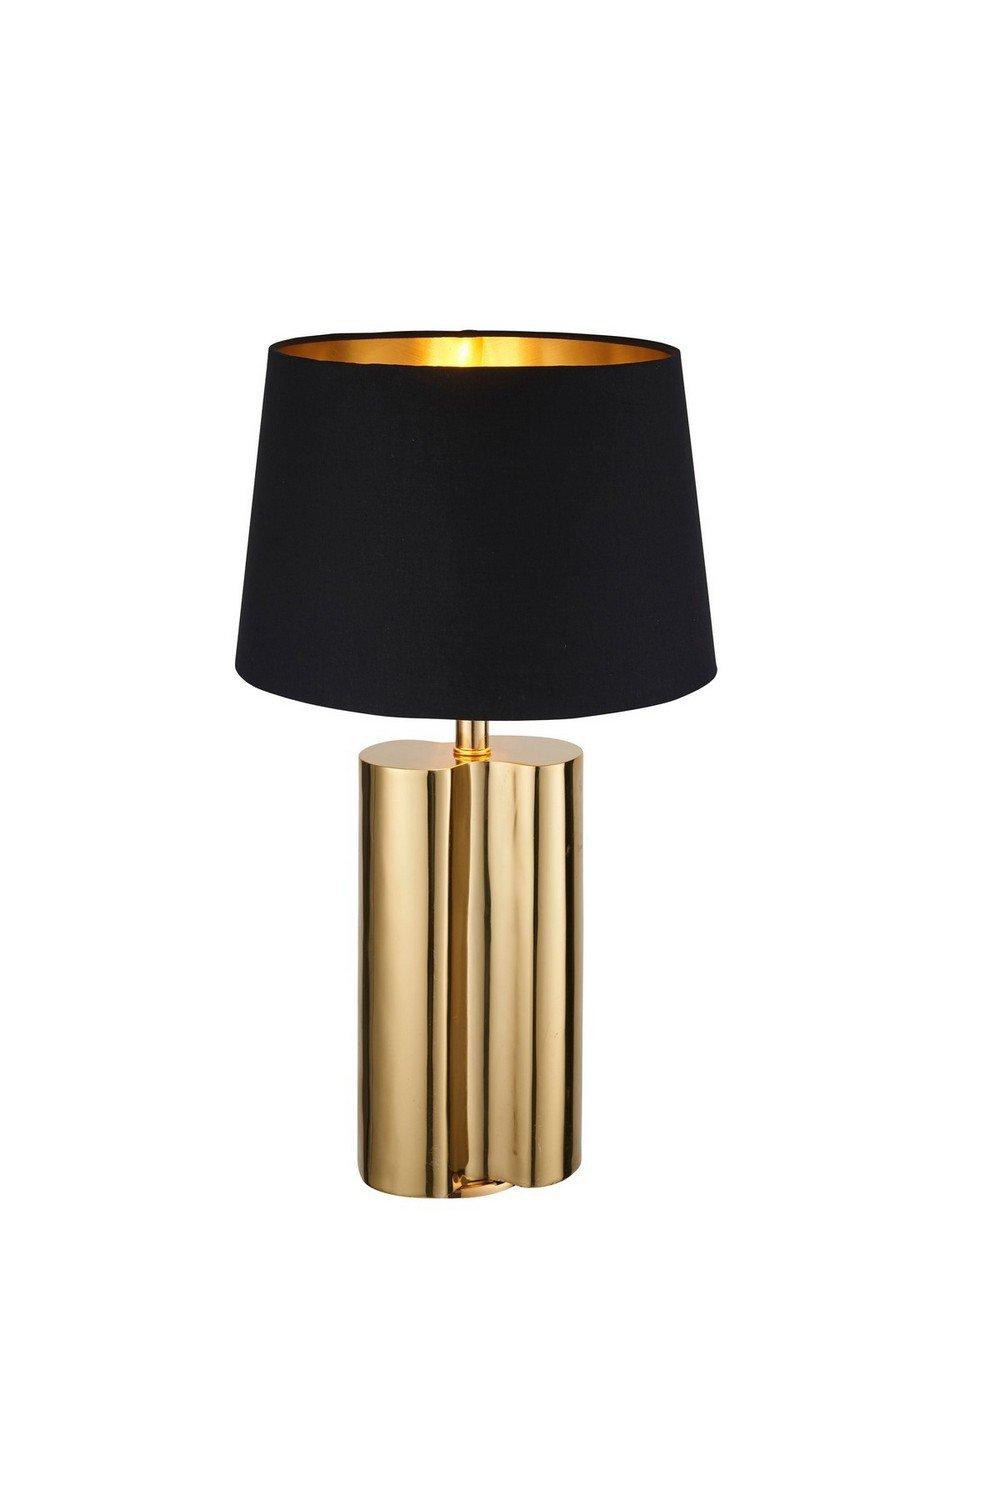 Calan Table Lamp Gold Effect Plate Black Cotton Fabric Shade